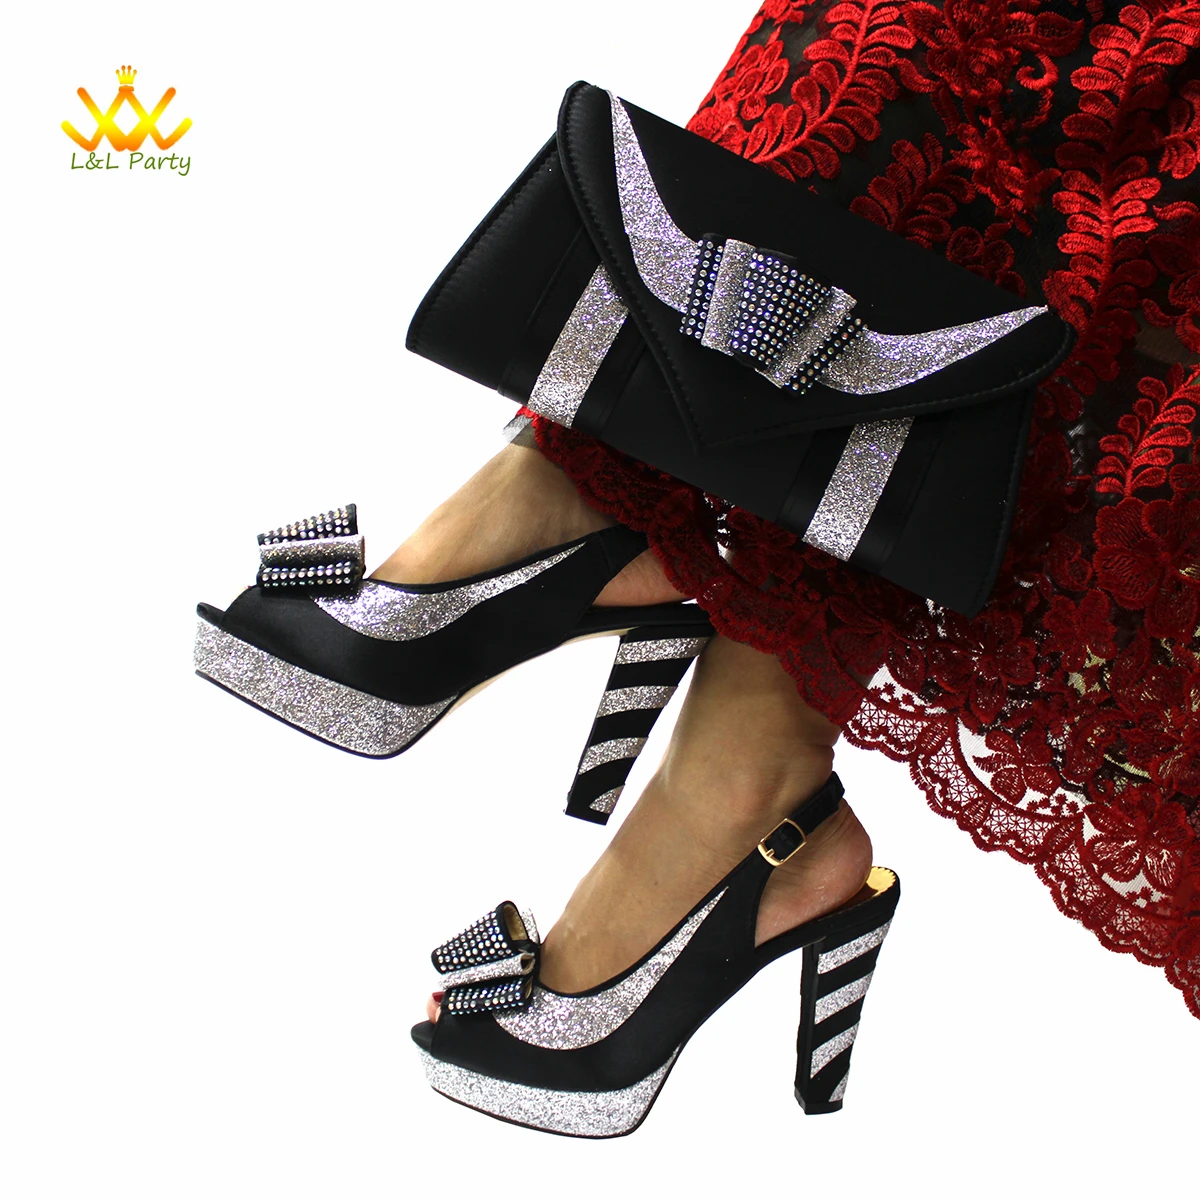 

Nigerian Ladies Super High Heels Sandal Shoes and Bag Set in Black Color For African Women Wedding Party Pump